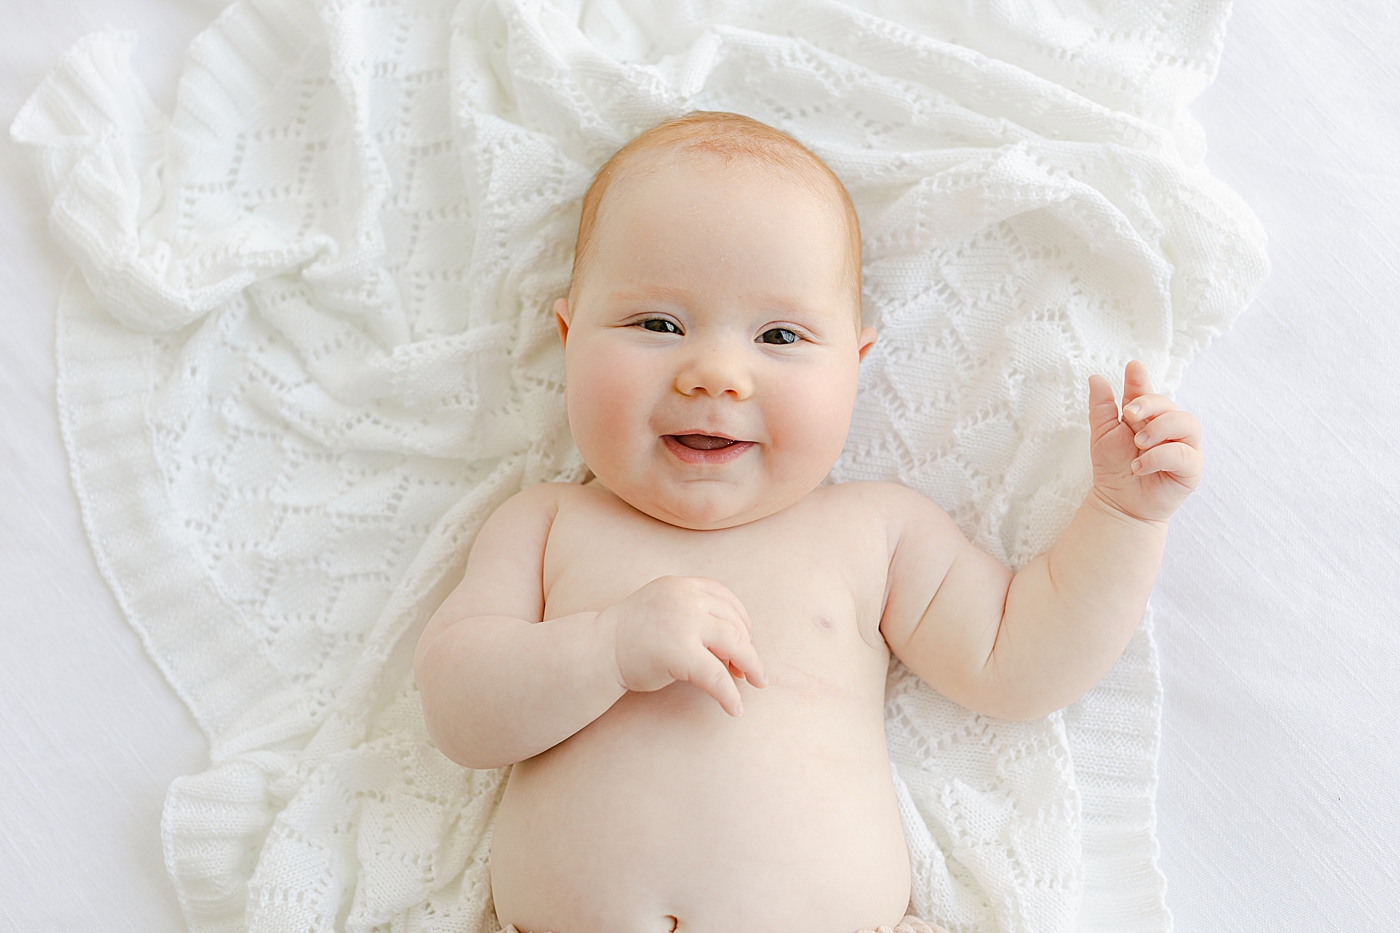 Baby girl smiling on a white blanket | Image by Sana Ahmed Photography